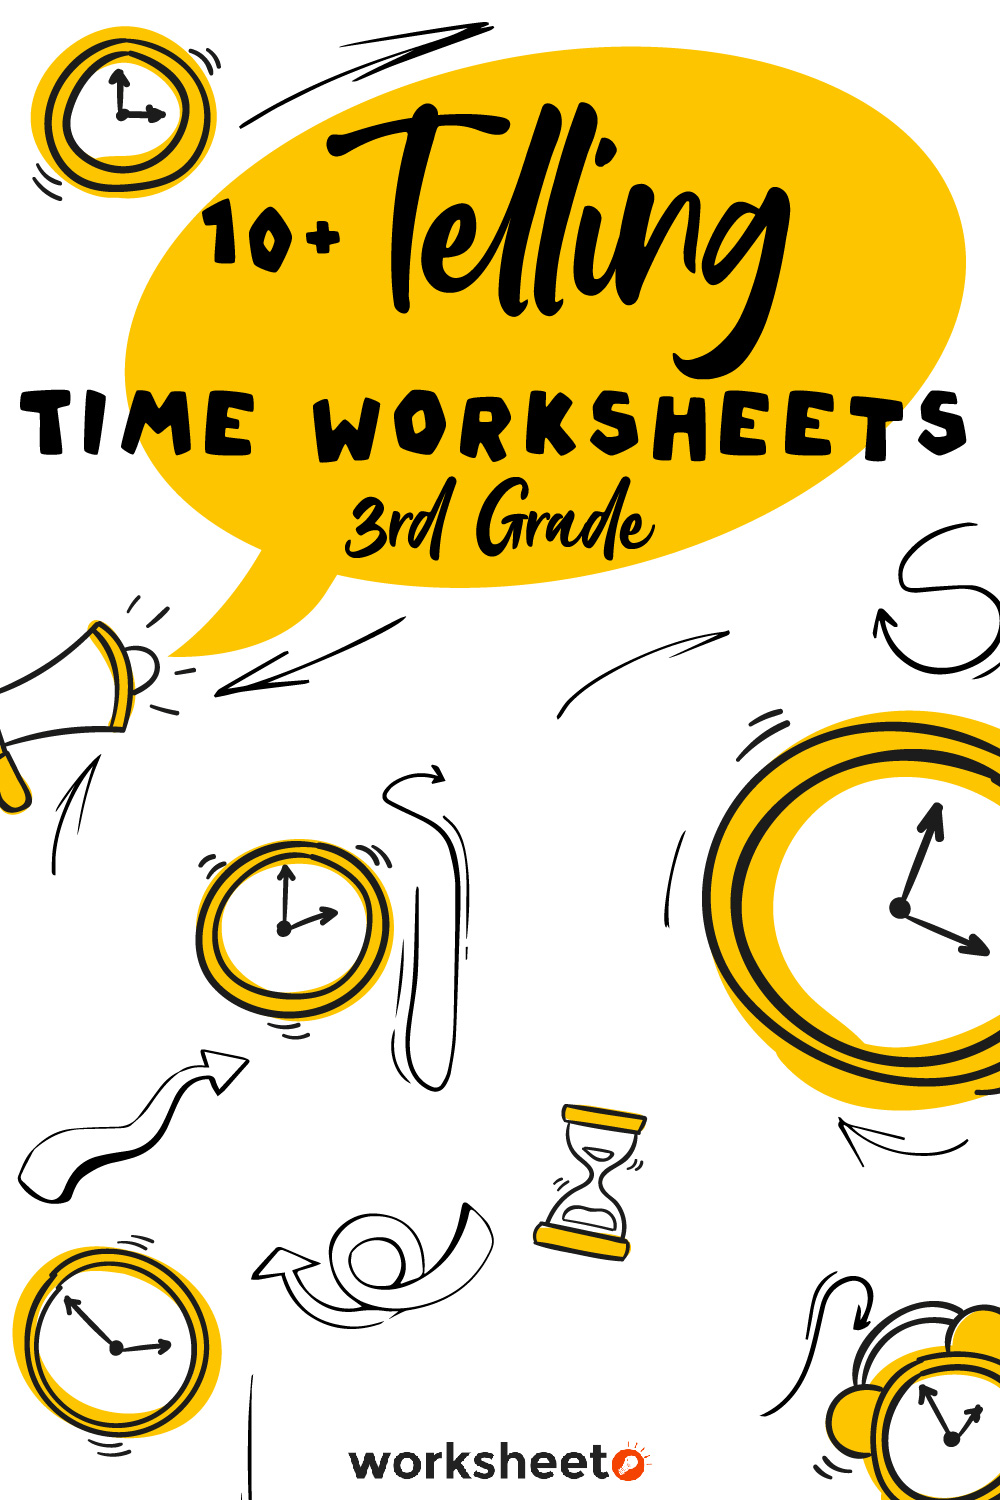 12 Images of Telling Time Worksheets 3rd Grade